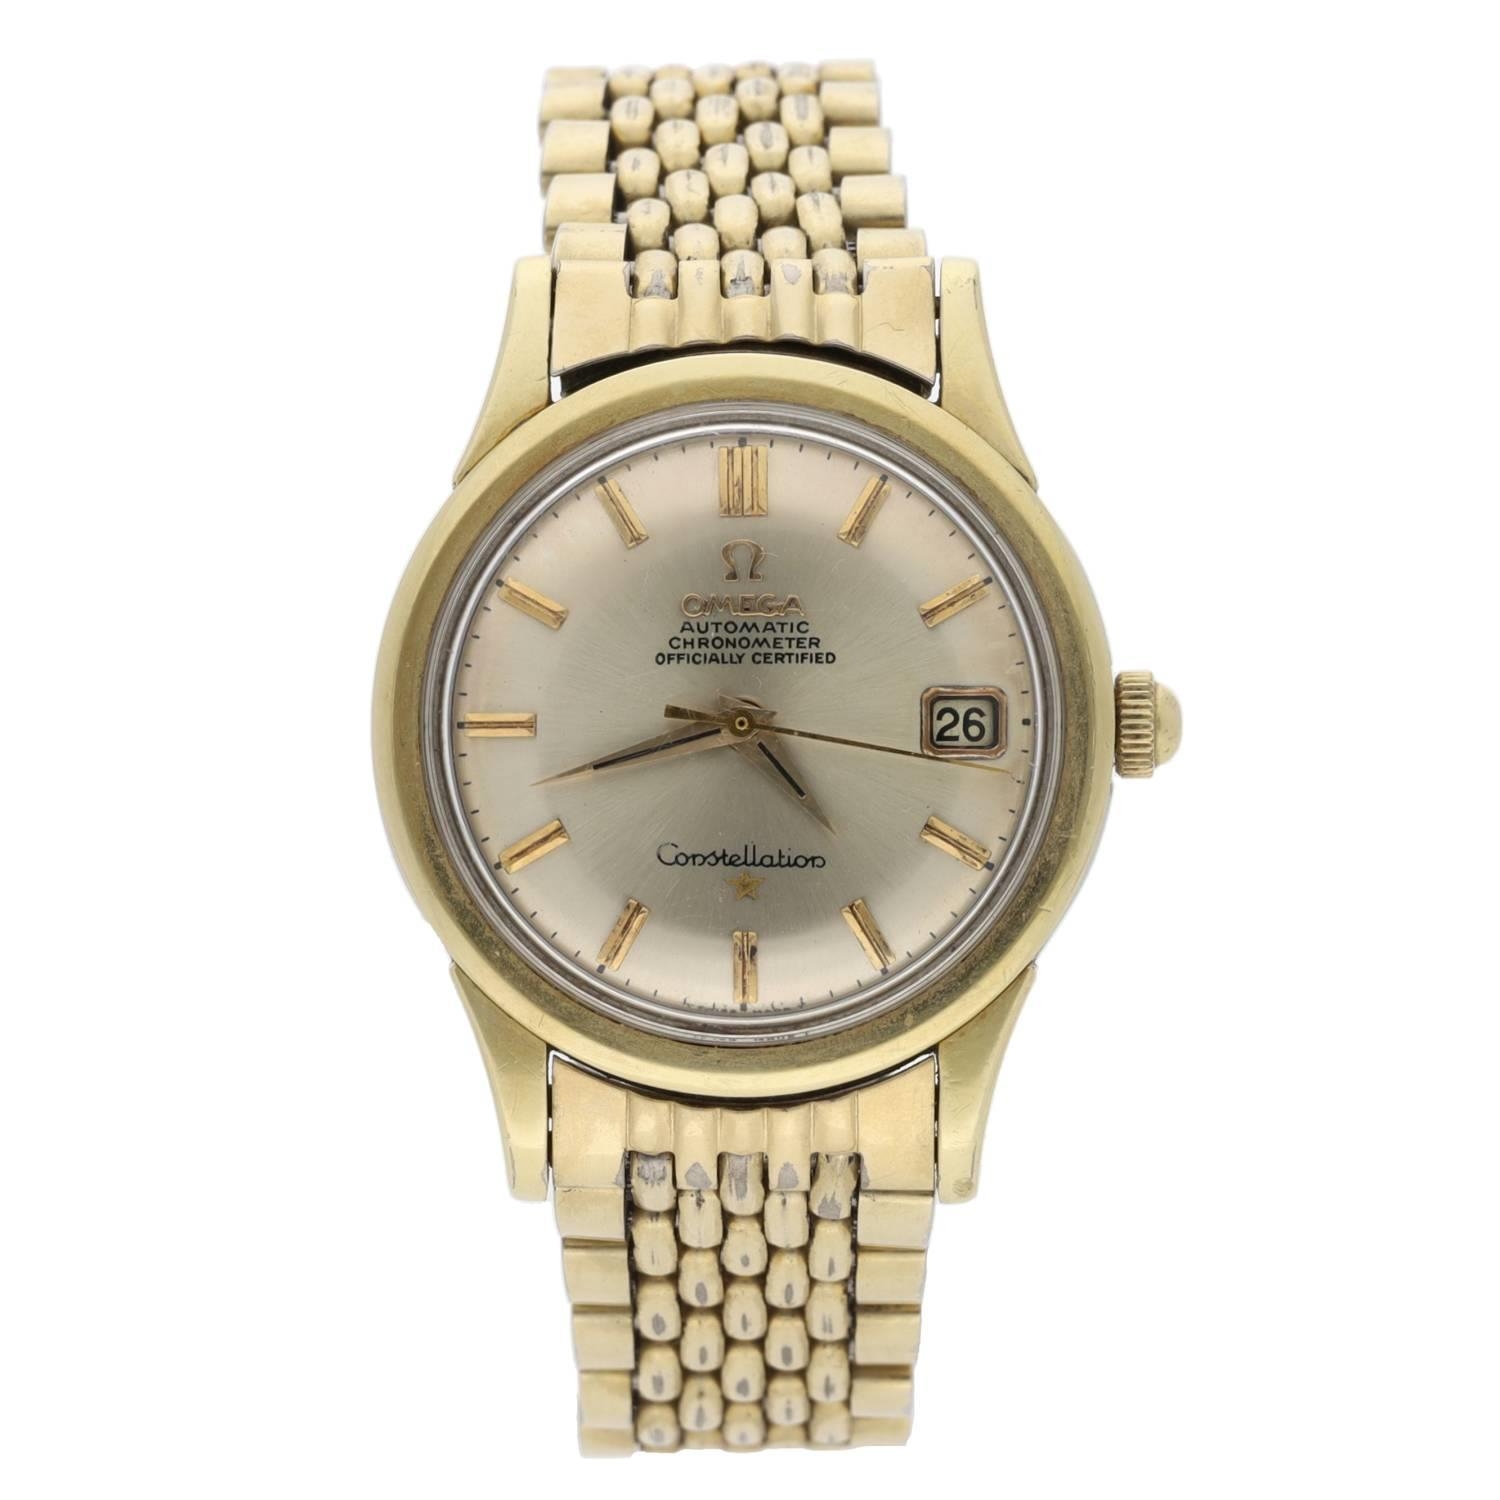 Omega Constellation Chronometer automatic gold capped and stainless steel gentleman's wristwatch, - Image 2 of 4